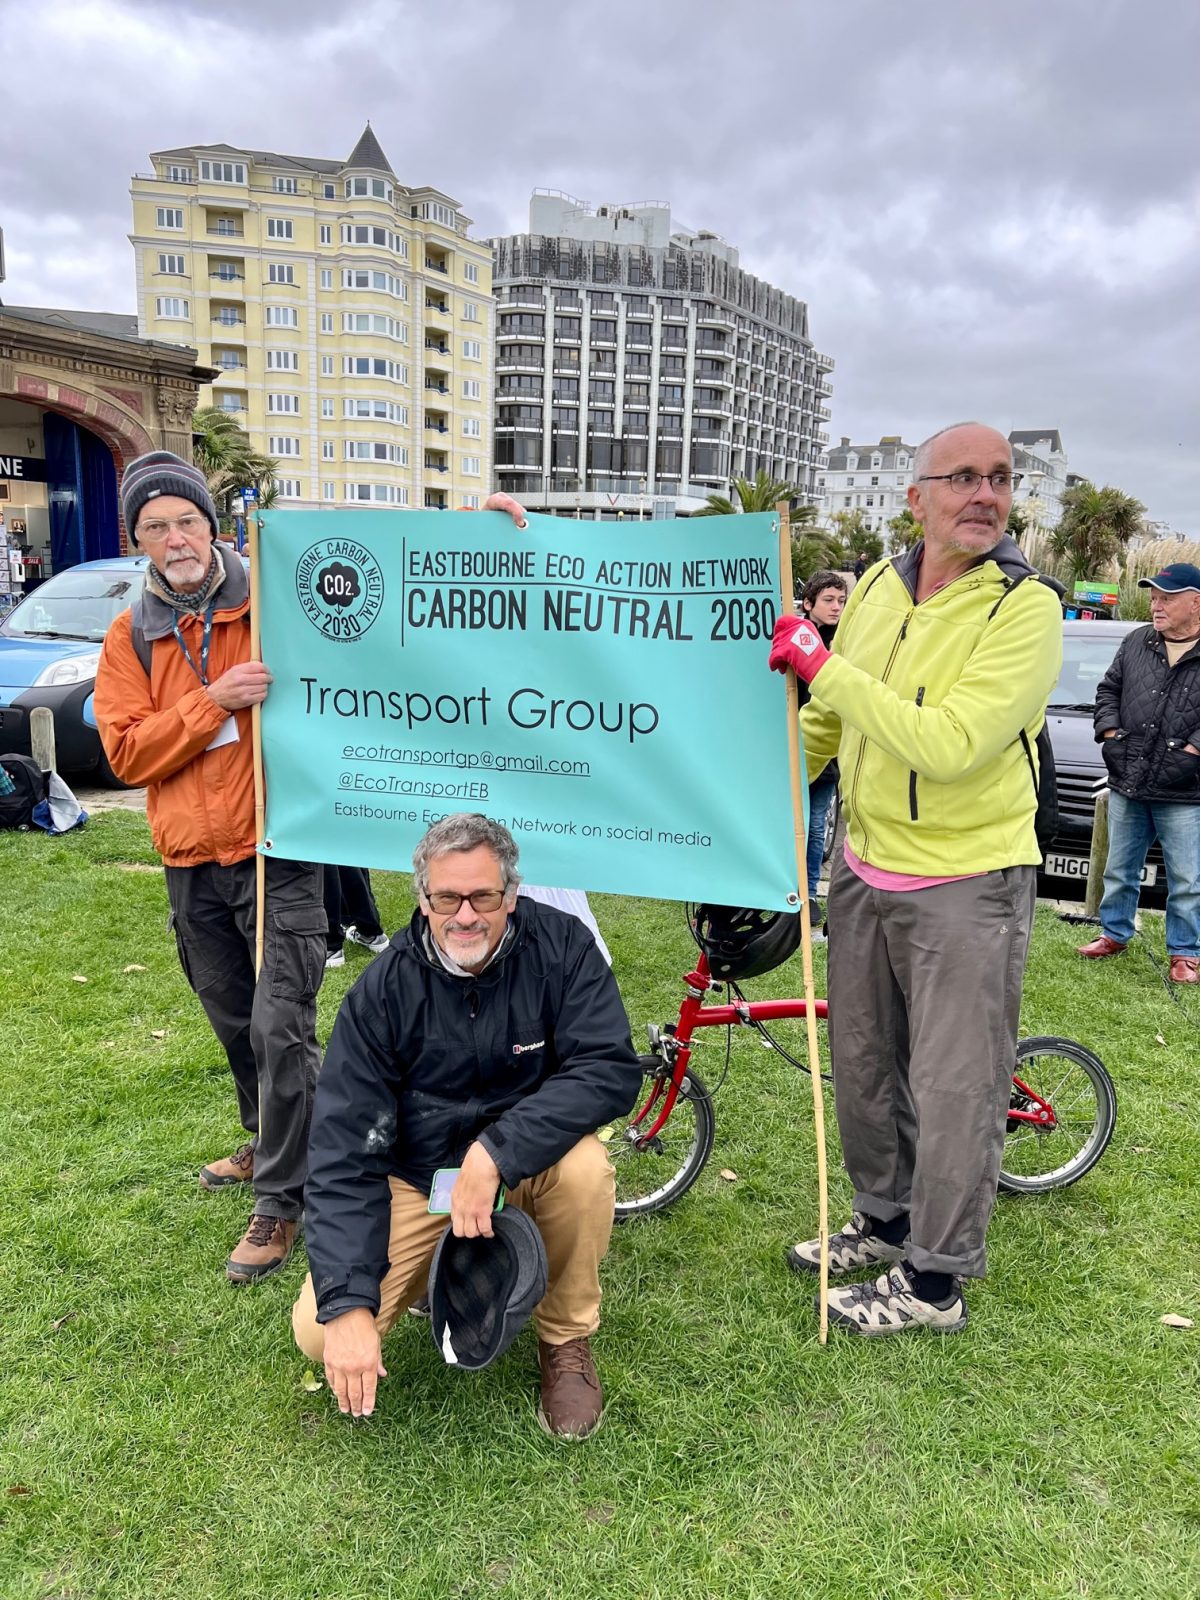 The Eastbourne ECO Action Network in 2021: What was our year like?